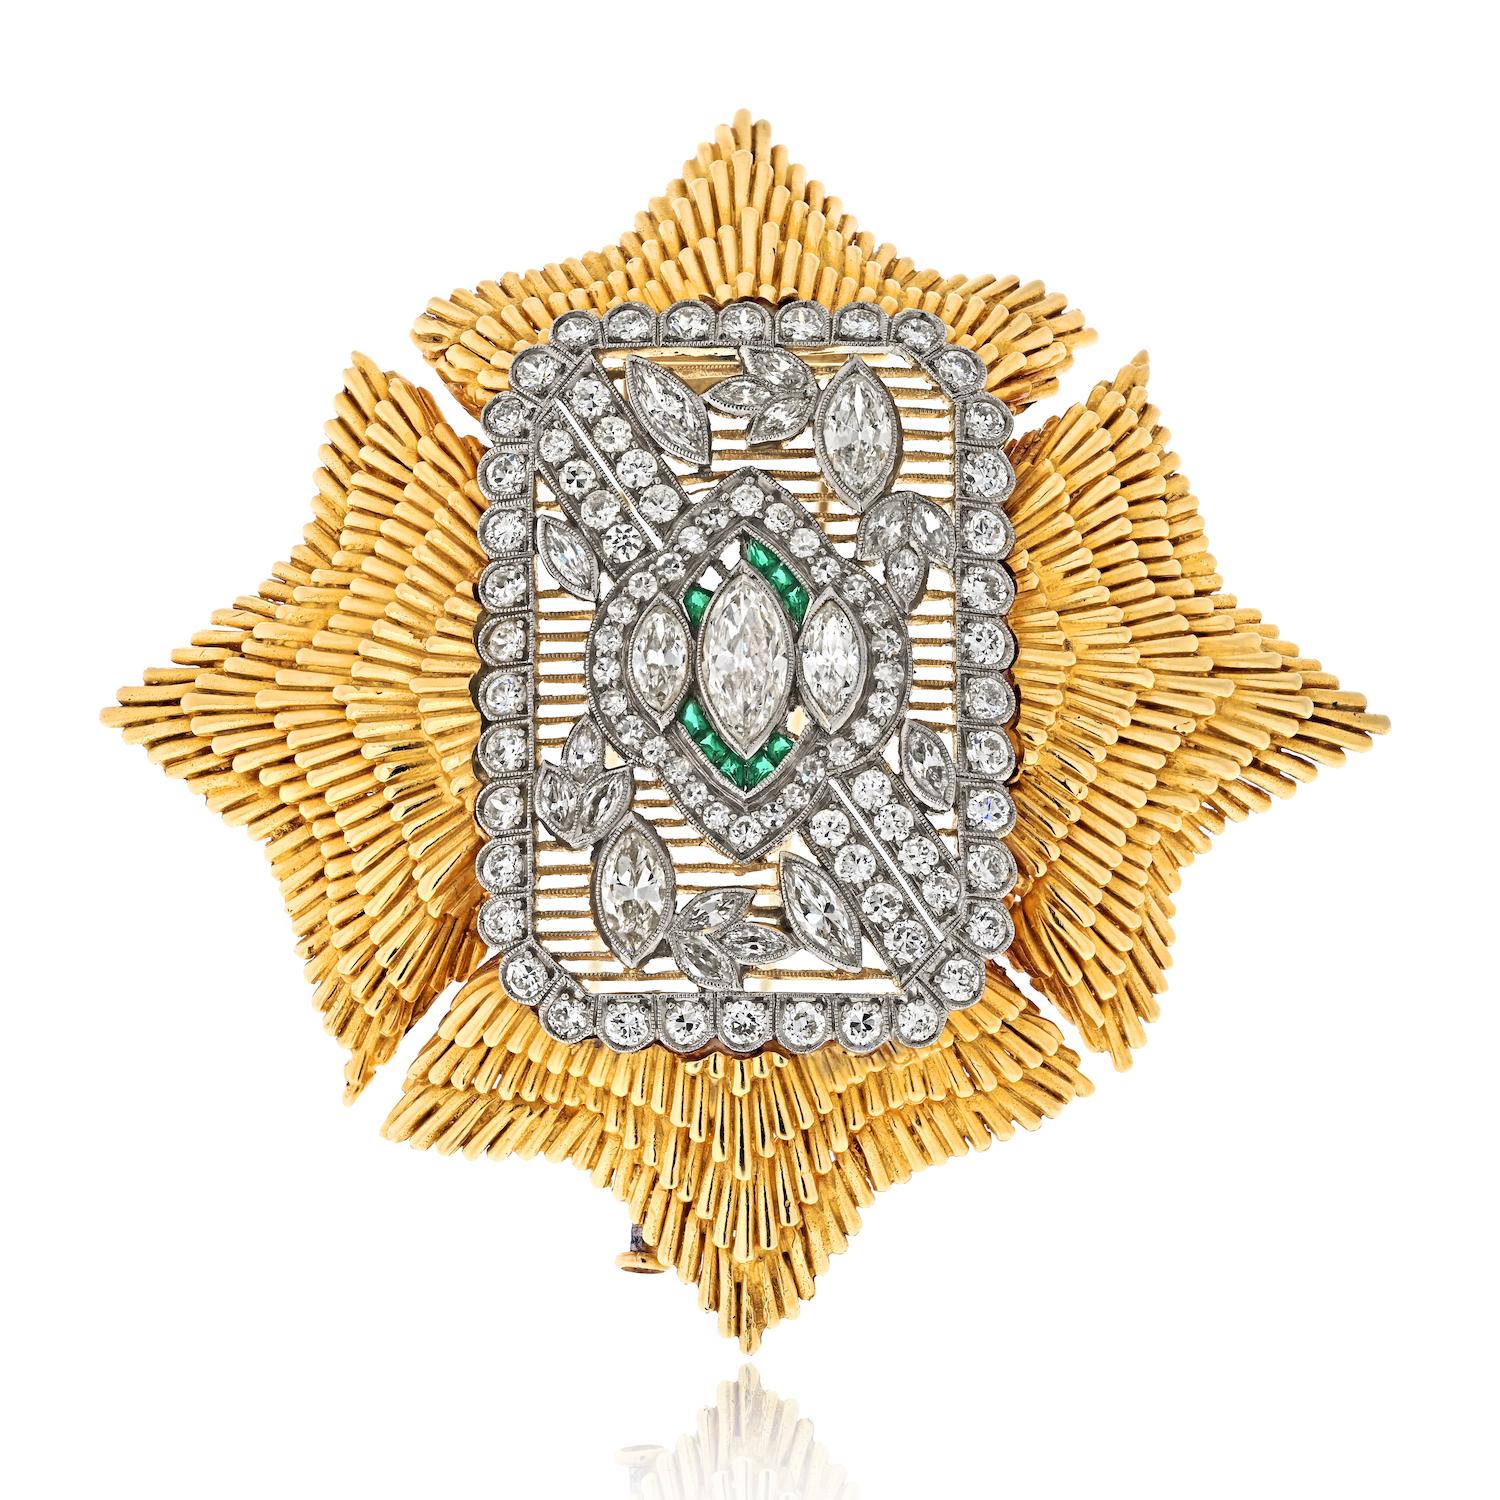 Indulge in the timeless allure of this David Webb 18K Yellow Gold, Platinum, Diamond, and Emerald Brooch, a magnificent piece that exudes elegance and sophistication. Crafted with utmost skill and artistry, this brooch is a true representation of